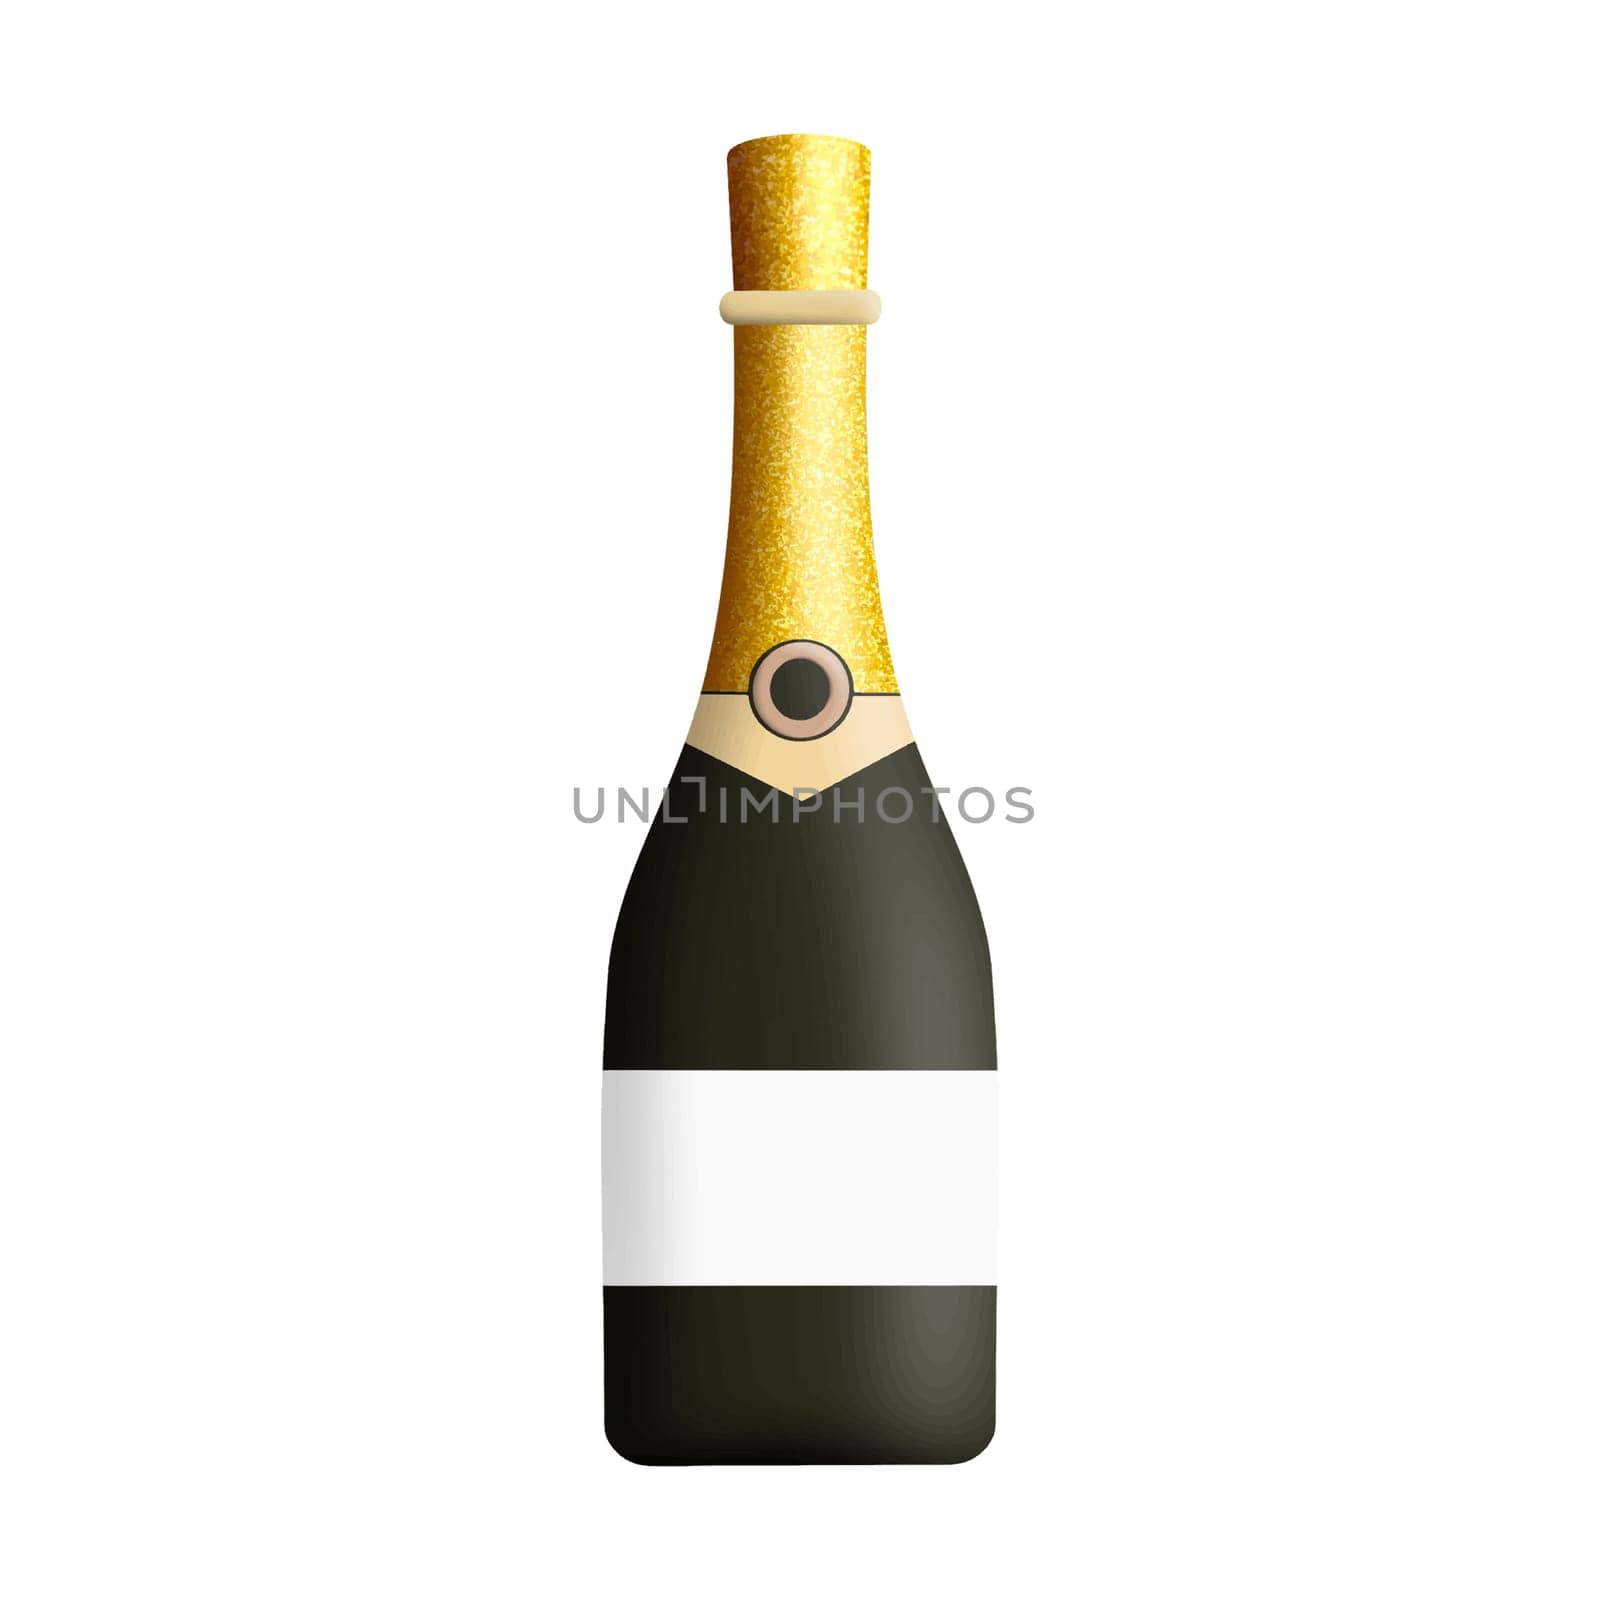 Champagne Bottle with Blank Label Party illustration isolated Clipart . Bottle of a champagne alcohol drink hand drawn illustration design for planner sticker, pattern, background, invitations, greeting cards, sublimation.